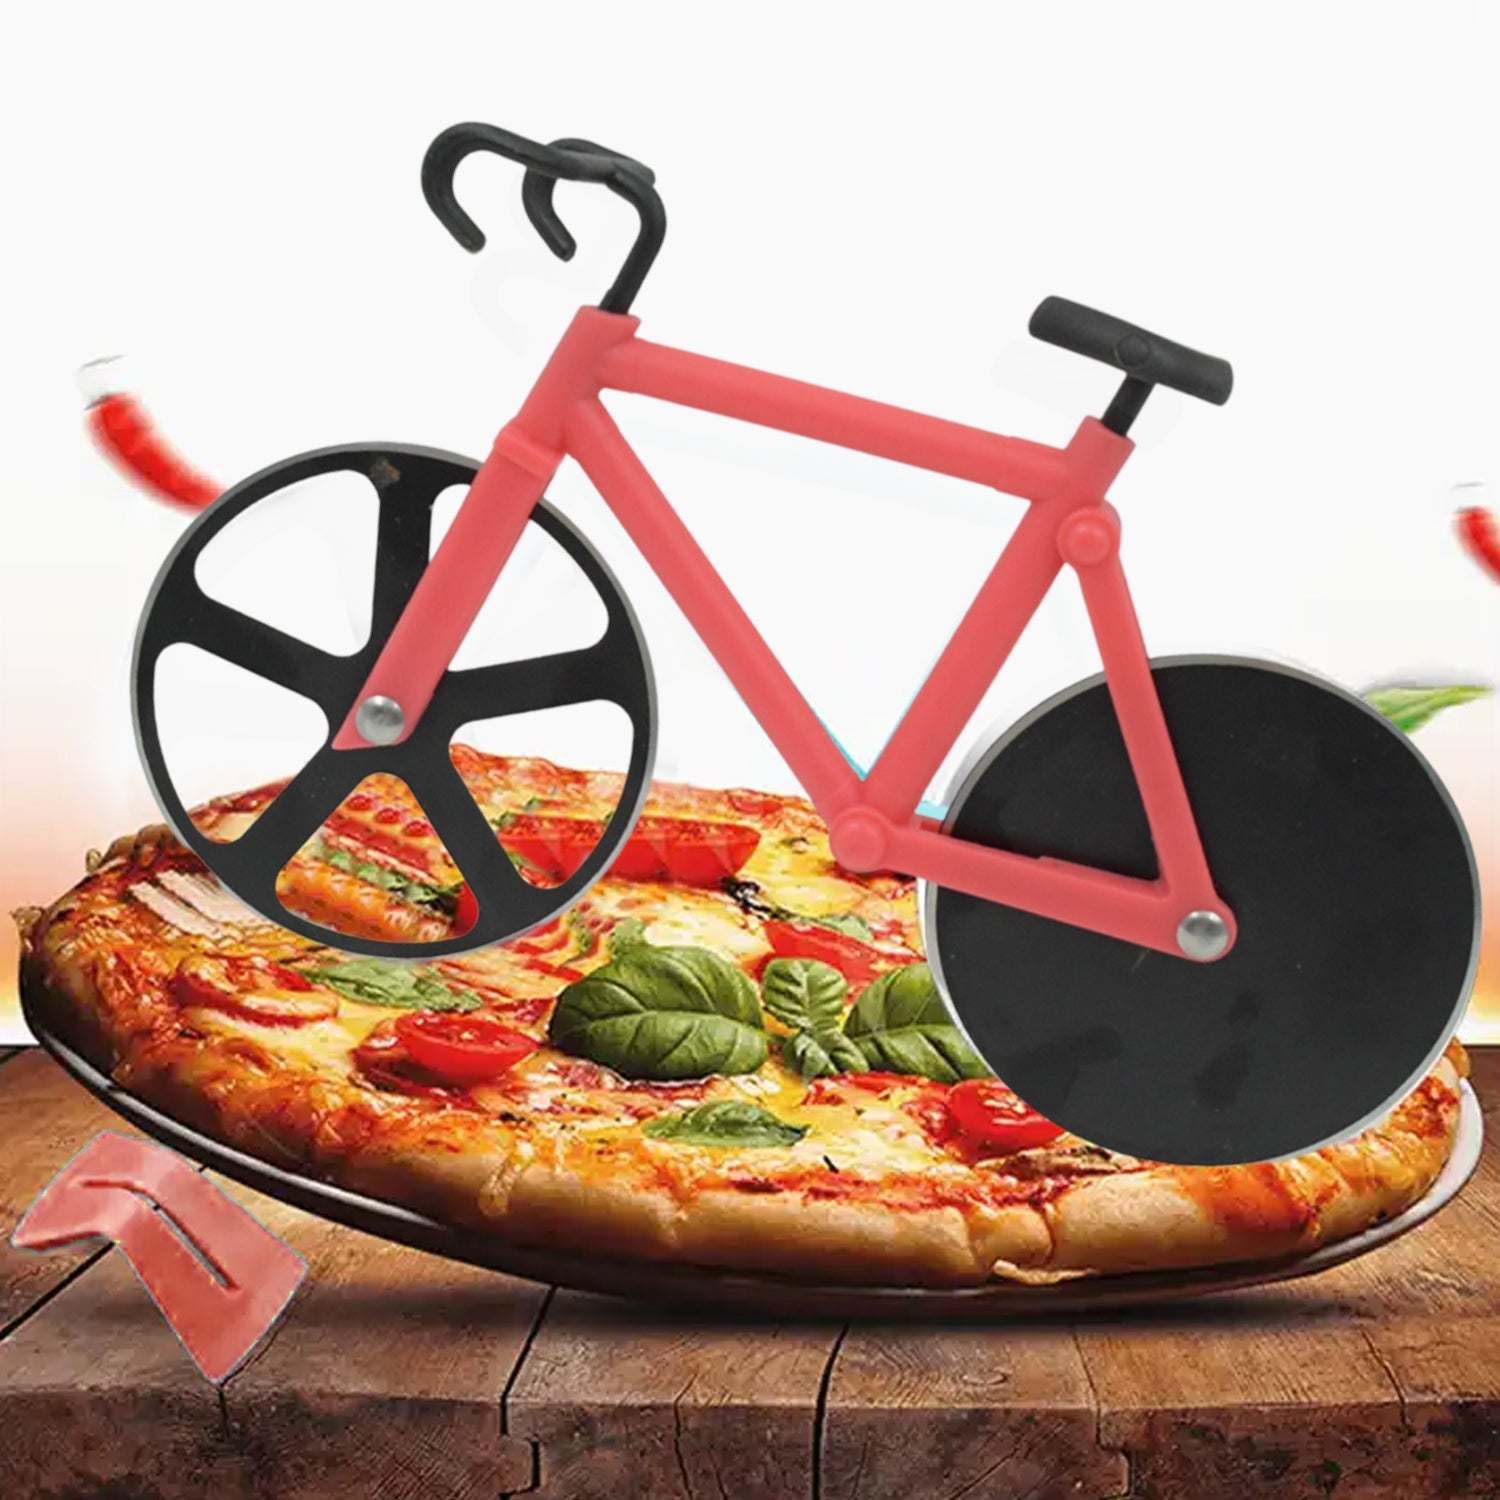 Stainless steel Bicycle shape Unbreakable Handle Pizza cutter | Pastry Cutter | Pizza Slicer with Grip on Handle and Stainless Steel Blade (1 Pc)